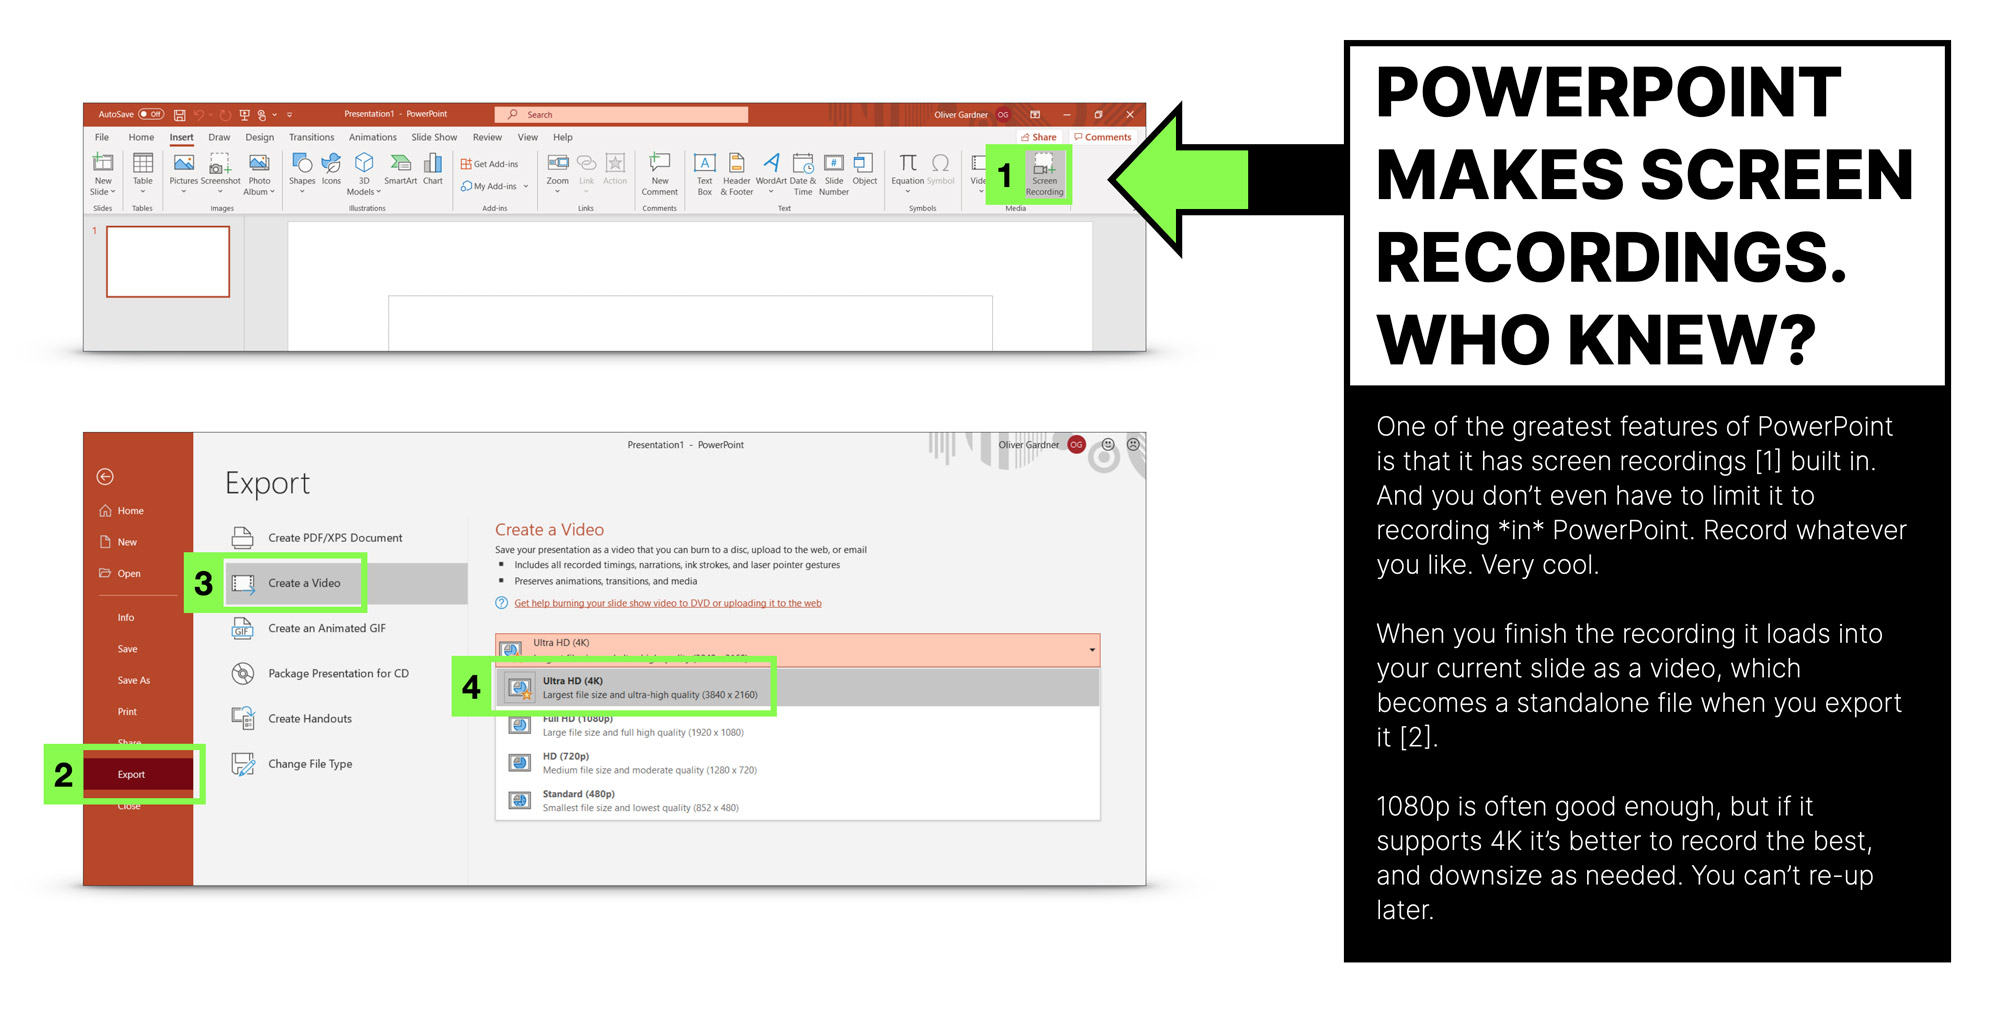 How to make a screen recording using PowerPoint